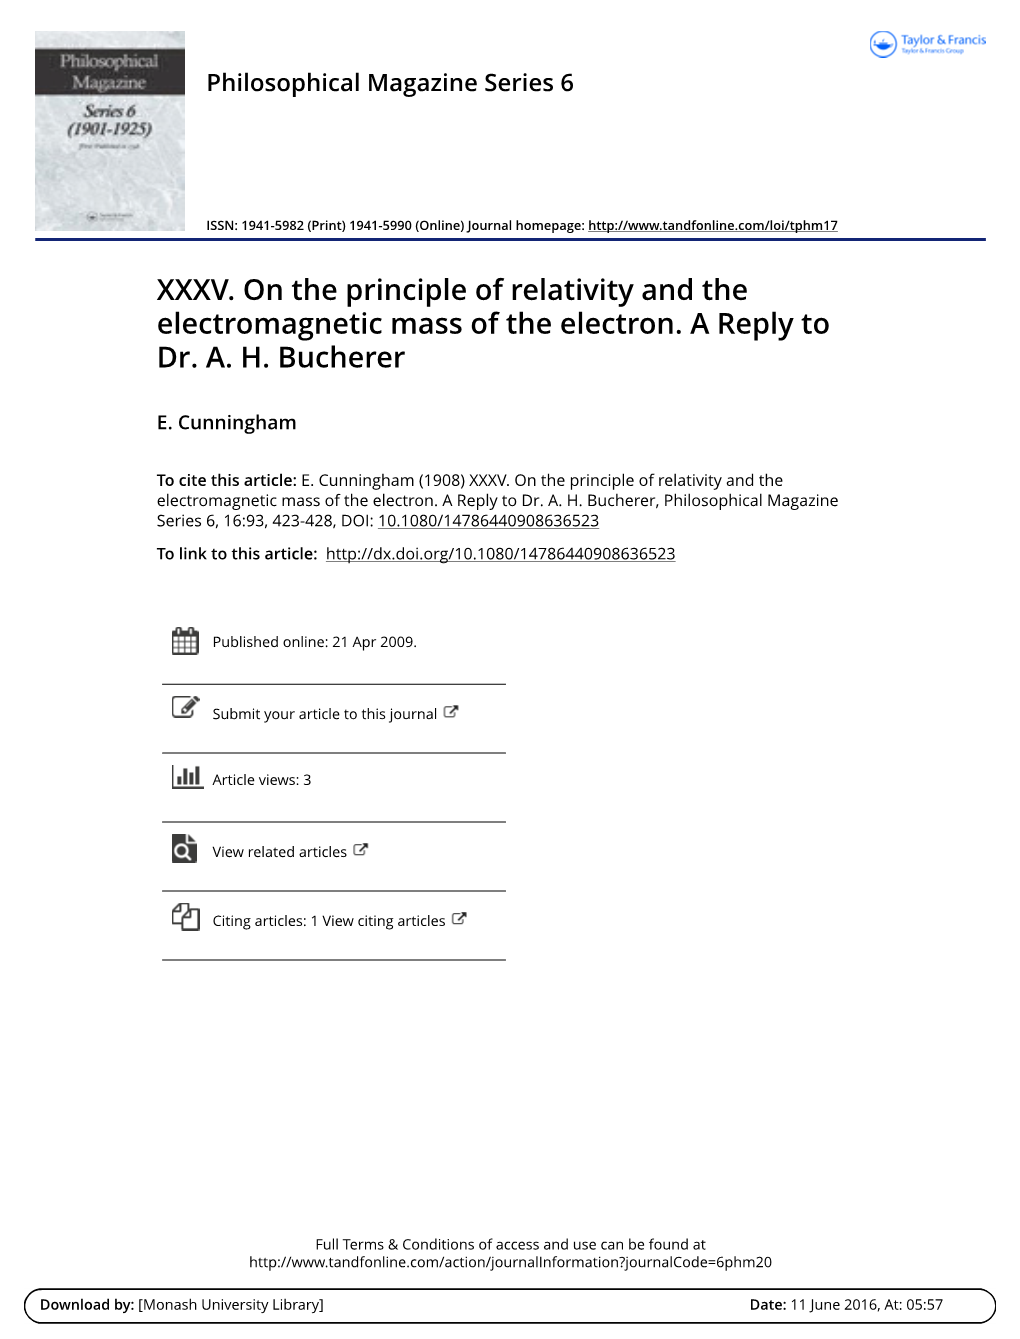 XXXV. on the Principle of Relativity and the Electromagnetic Mass of the Electron